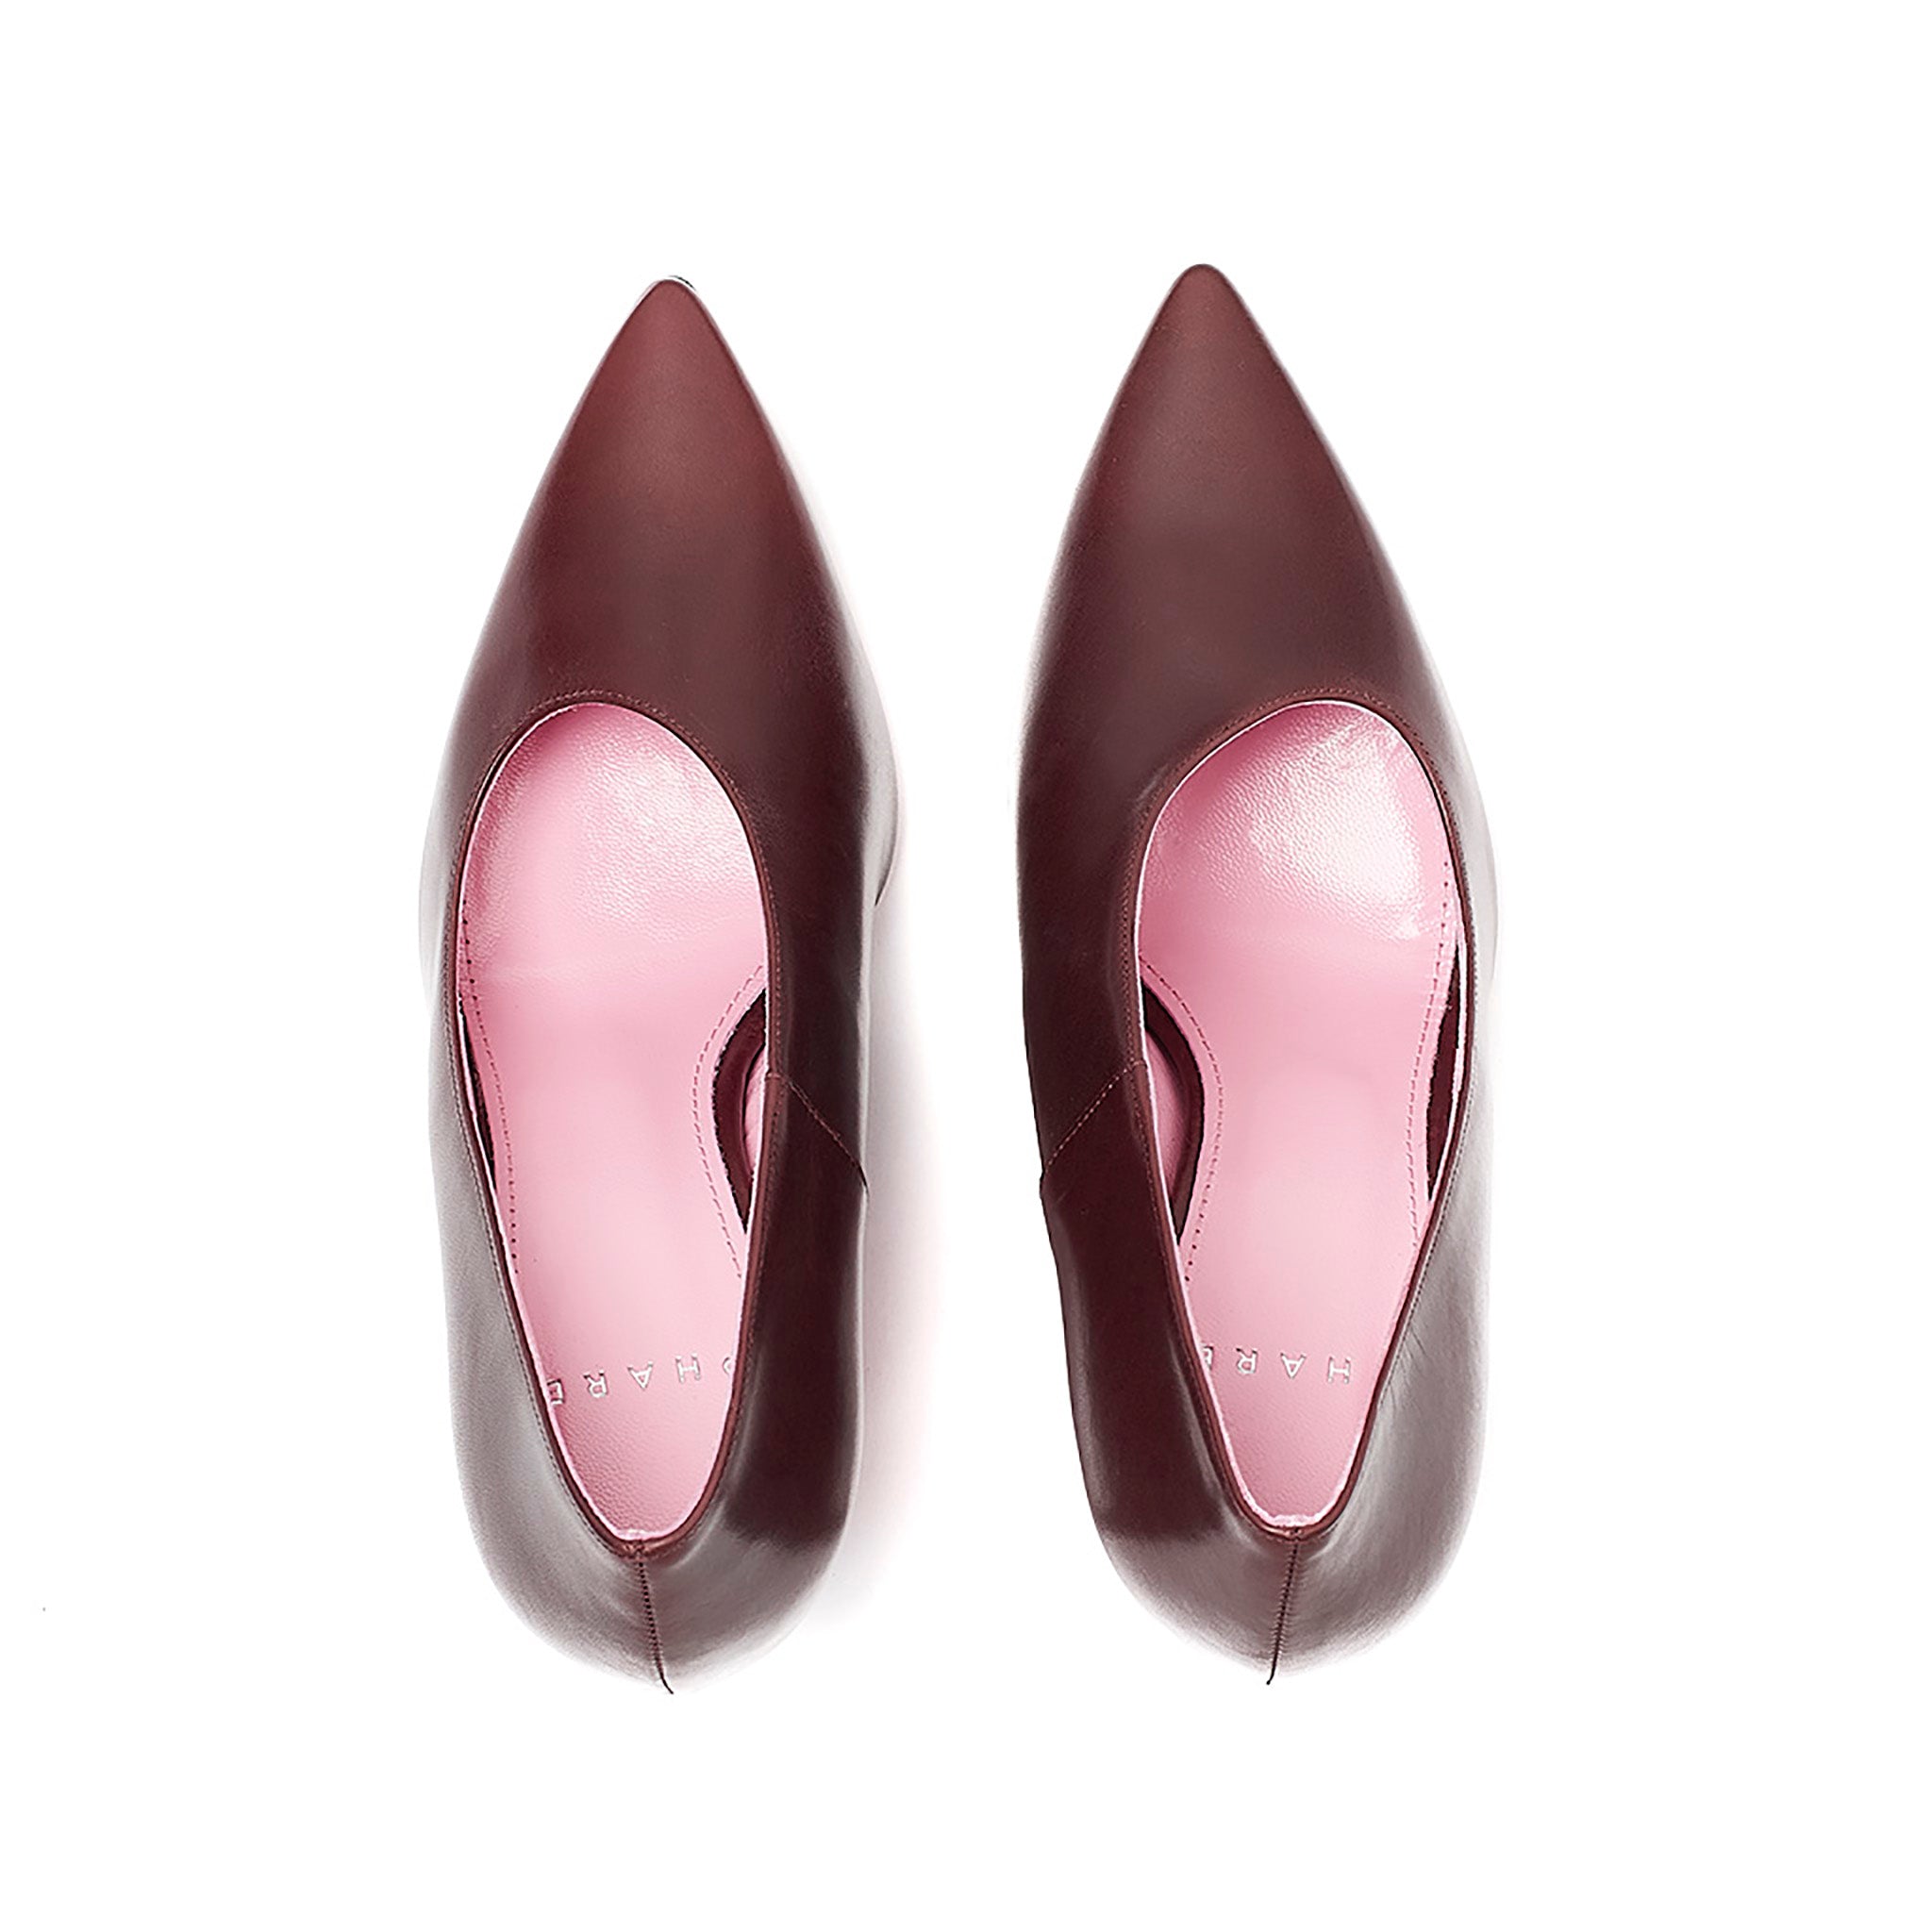 Phare Asymmetrical pump in bordeaux leather top view 